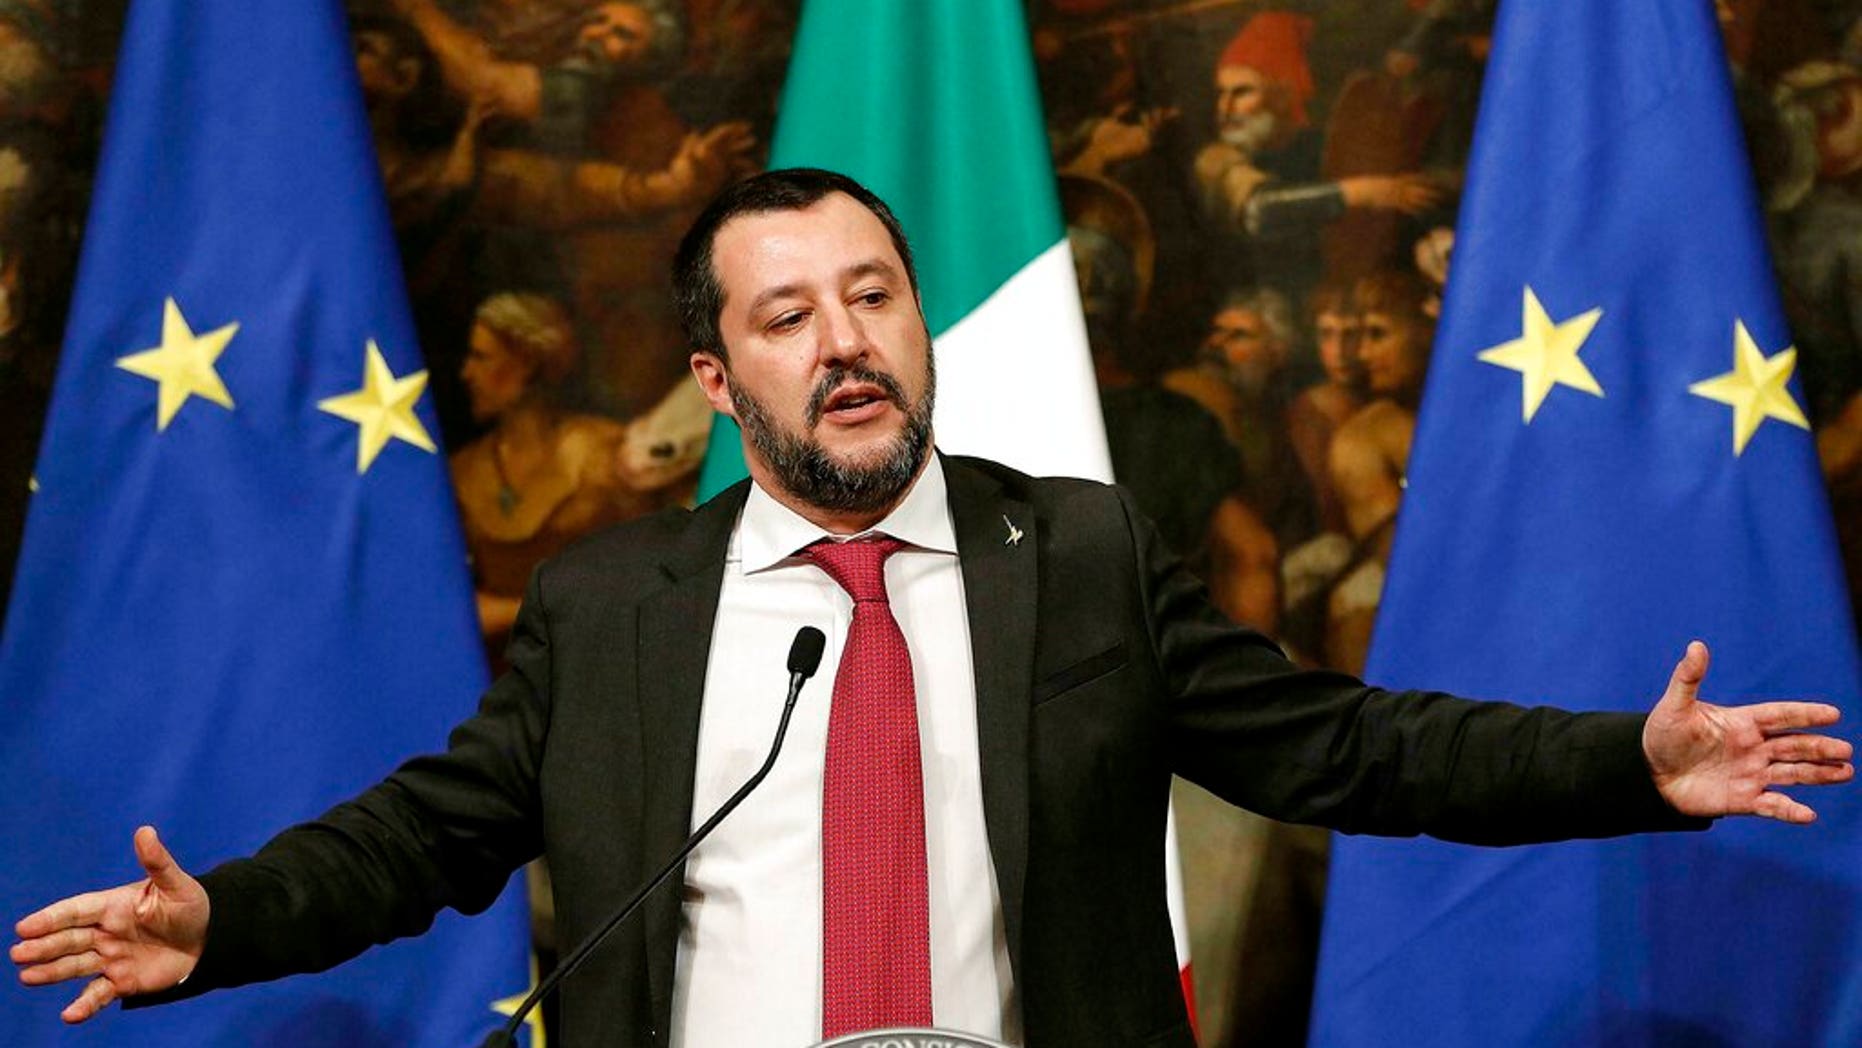 Italy’s Salvini slams France for migrant crisis: ‘I don’t take lessons on humanity and generosity from Macron’